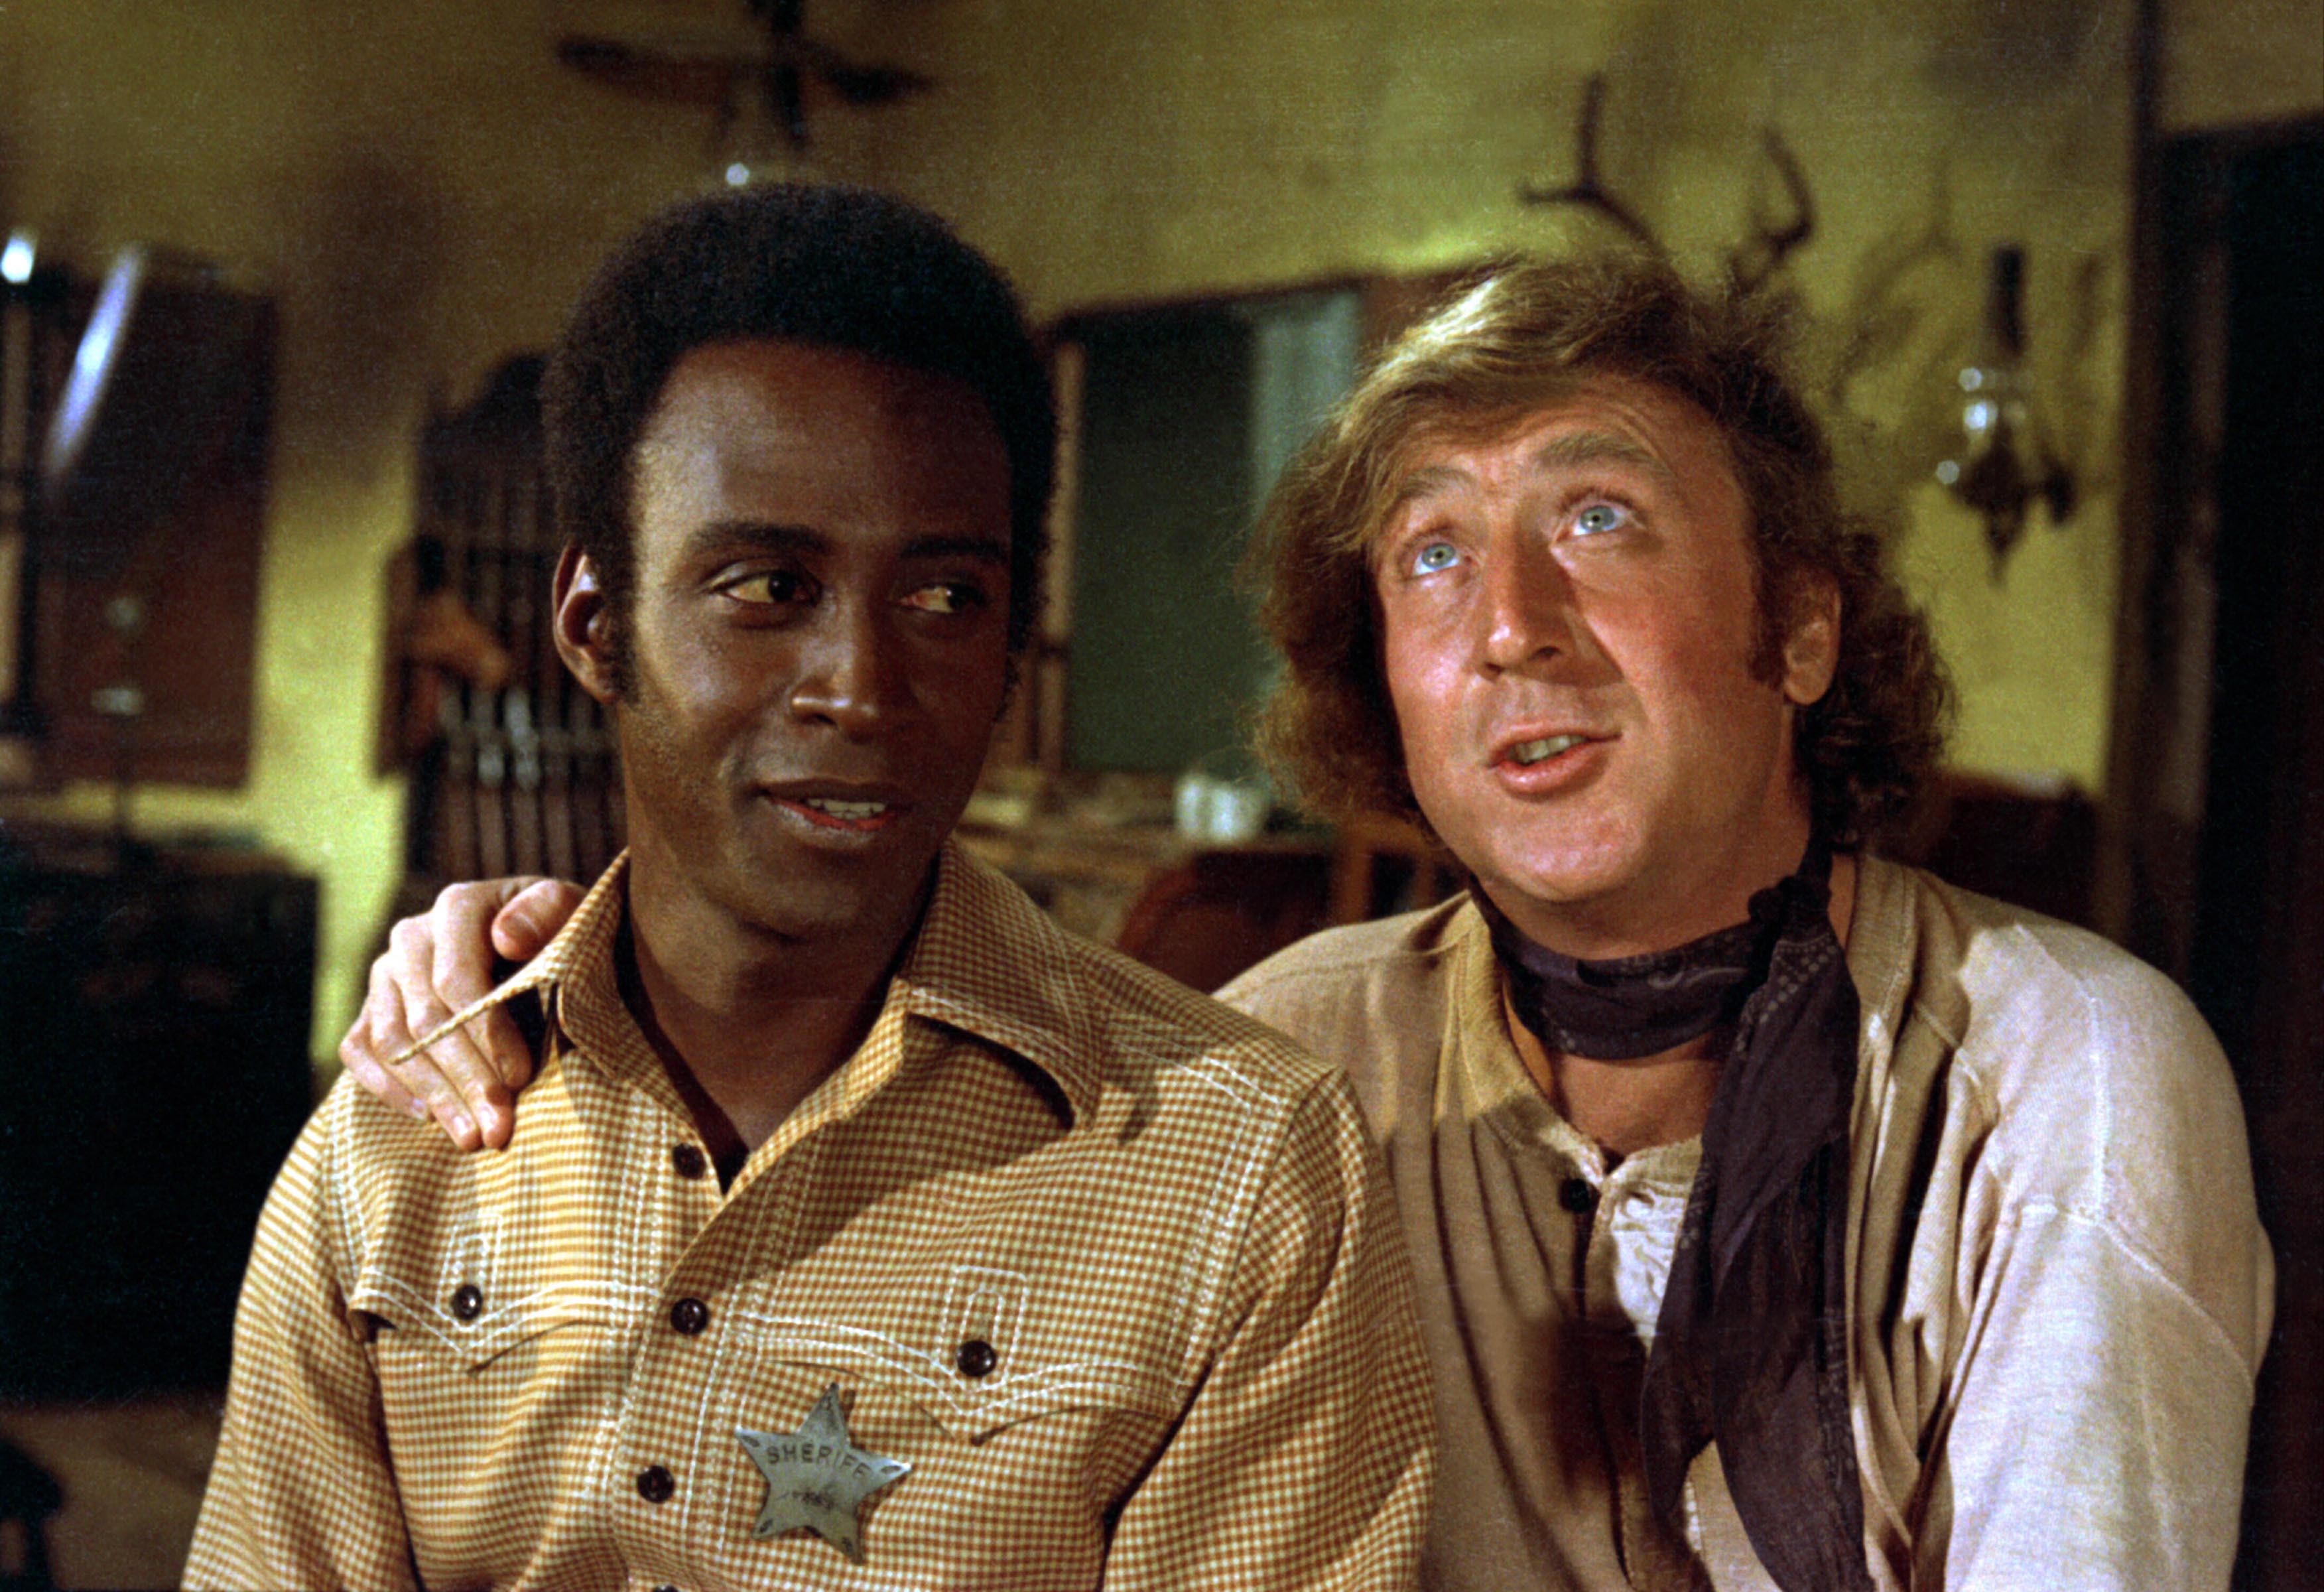 Lead duo Cleavon Little and Gene Wilder, neither of whom were the first choice for their roles